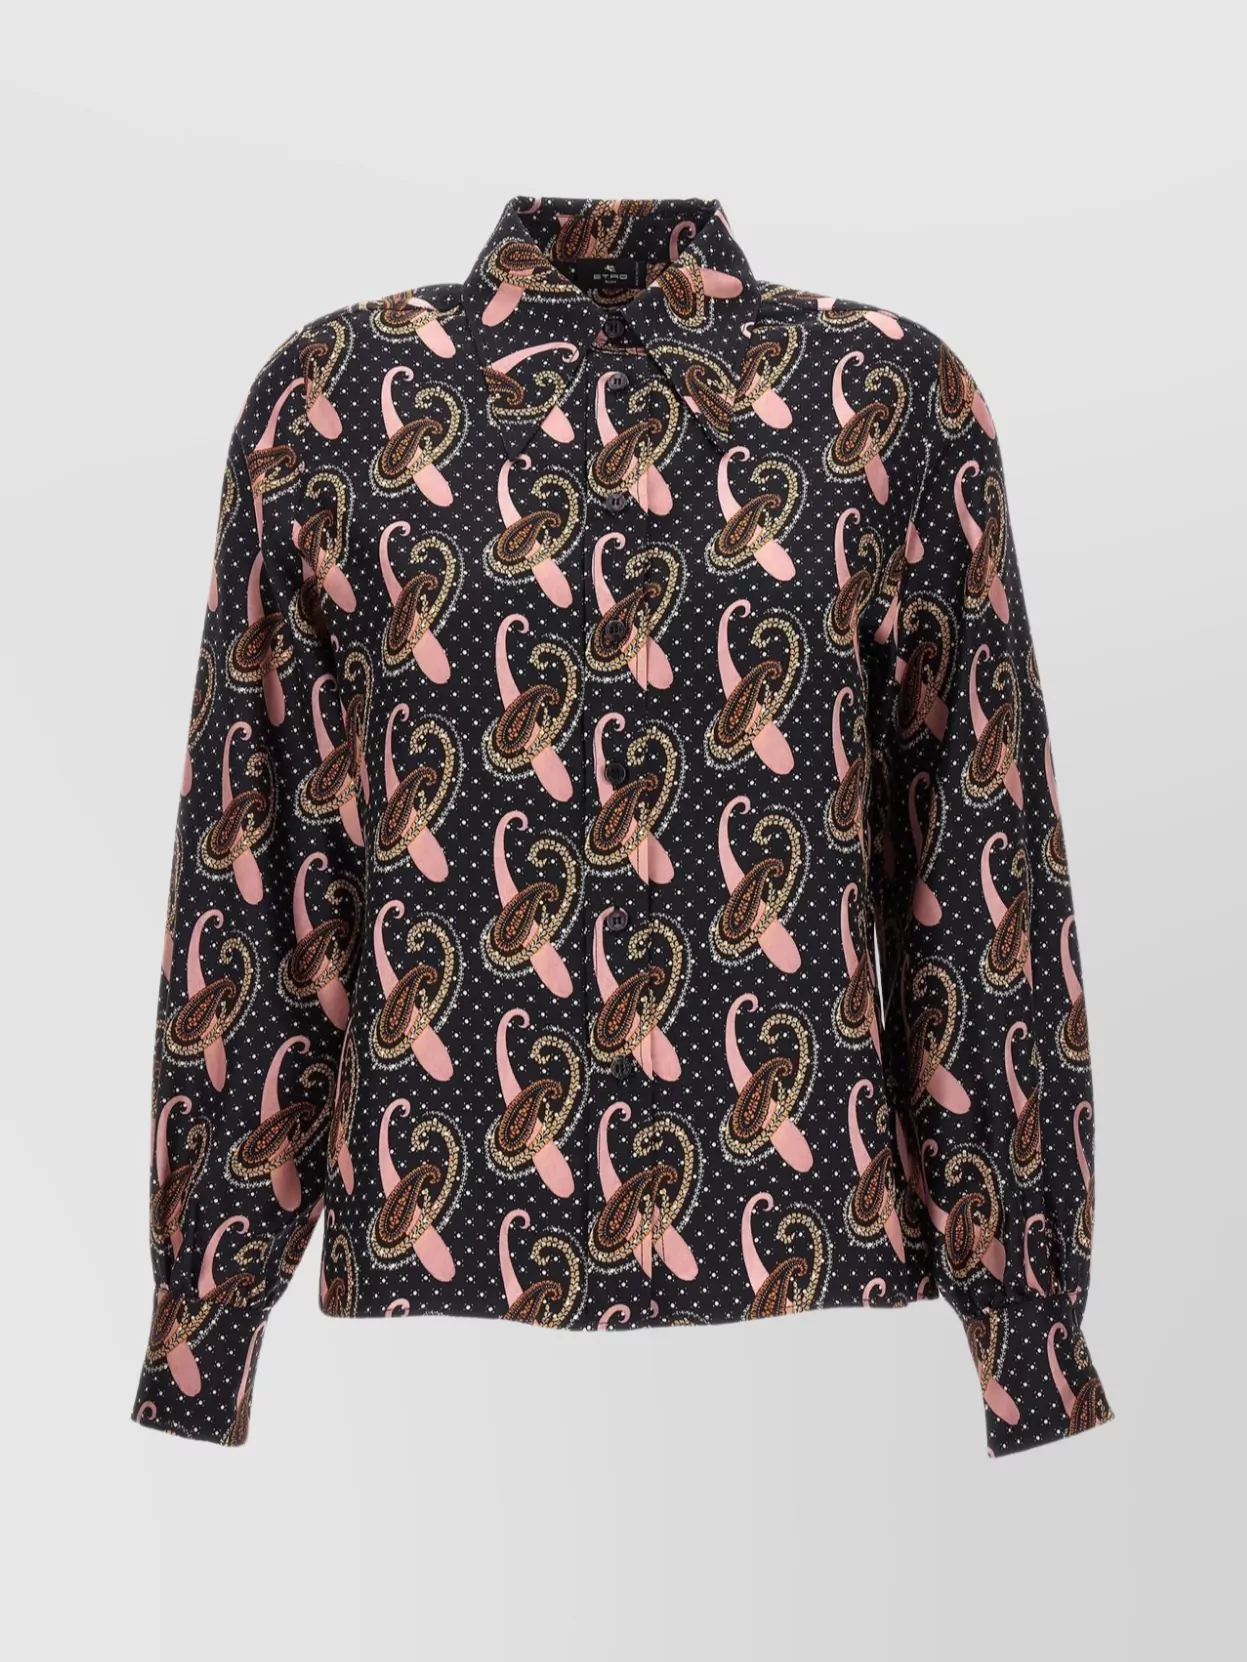 Etro Paisley Print Lightweight Collared Shirt In Gold